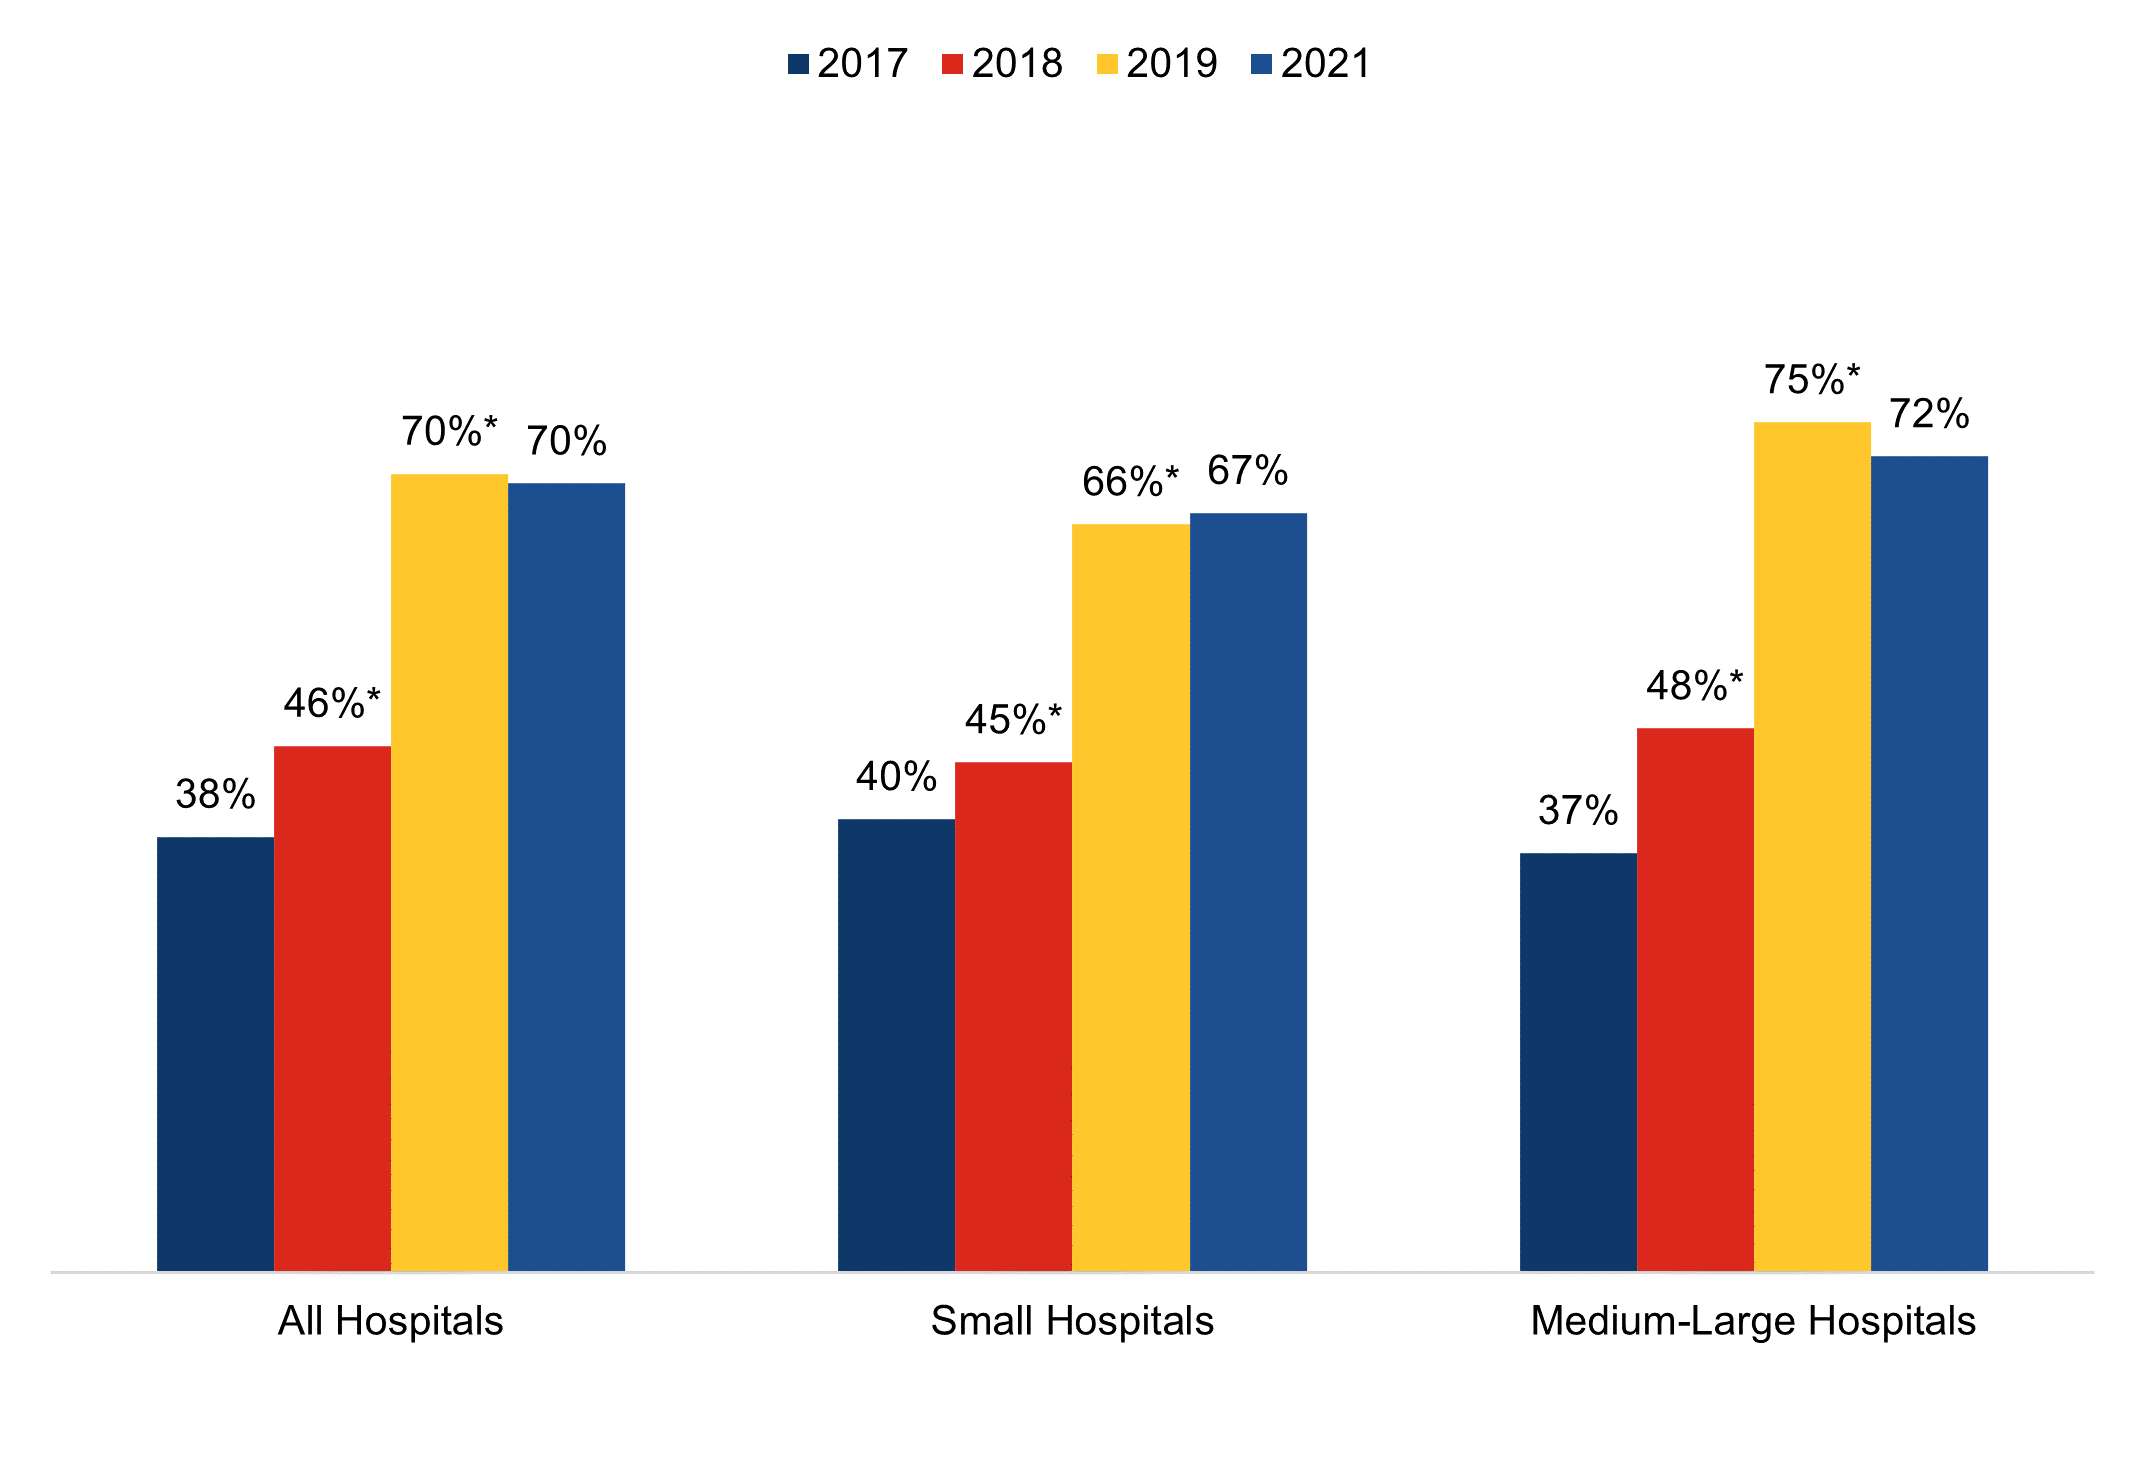 The figure is a bar chart that shows the percent of all hospitals, small hospitals and medium and large hospitals that provided patients access to their health information through an app for the years 2017, 2018, 2019 and 2021. In 2017, 38 percent of all hospitals, 40 percent of small hospitals, and 37 percent of medium and large hospitals provided patients access to their health information through an app. In 2018, 46 percent of all hospitals, 45 percent of small hospitals, and 48 percent of medium and large hospitals provided patients access to their health information through an app. These were all statistically significant increases from 2017. In 2019, 70 percent of all hospitals, 66 percent of small hospitals, and 75 percent of medium and large hospitals provided patients access to their health information through an app. These were all statistically significant increases from 2018. In 2021, 70 percent of all hospitals, 67 percent of small hospitals, and 72 percent of medium and large hospitals provided patients access to their health information through an app. These were not statistically different from the rates in 2019.